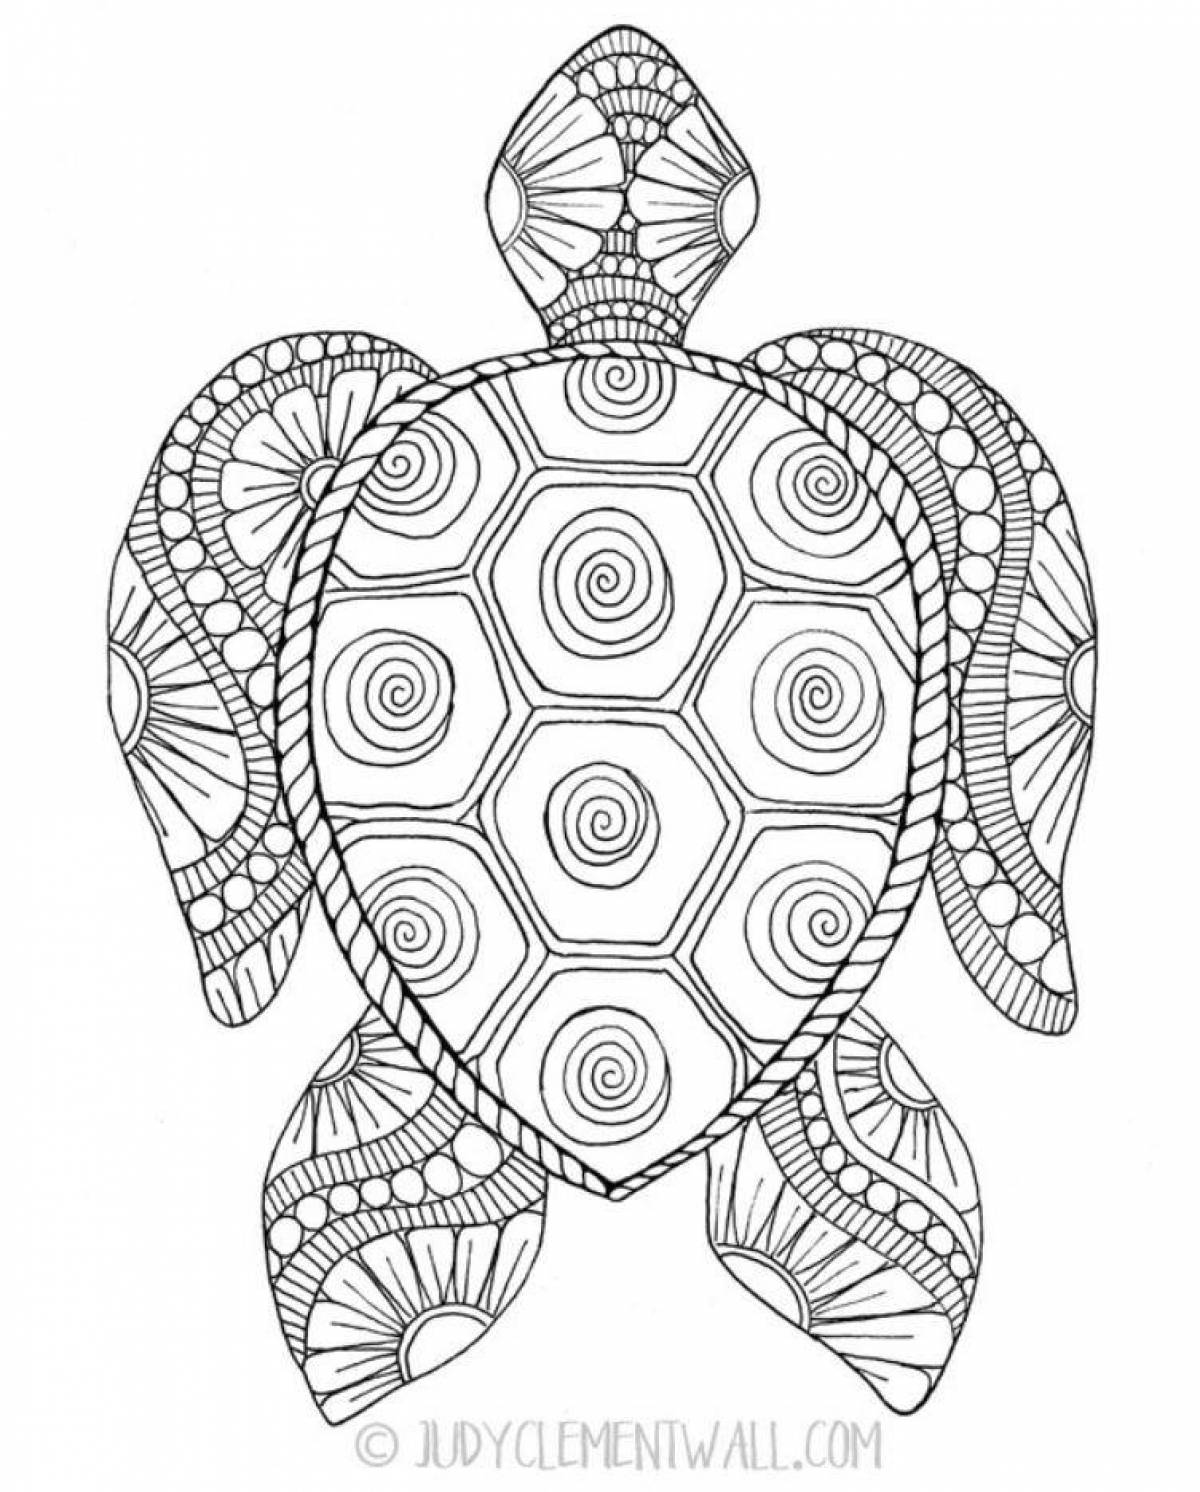 Exciting anti-stress easy coloring pages